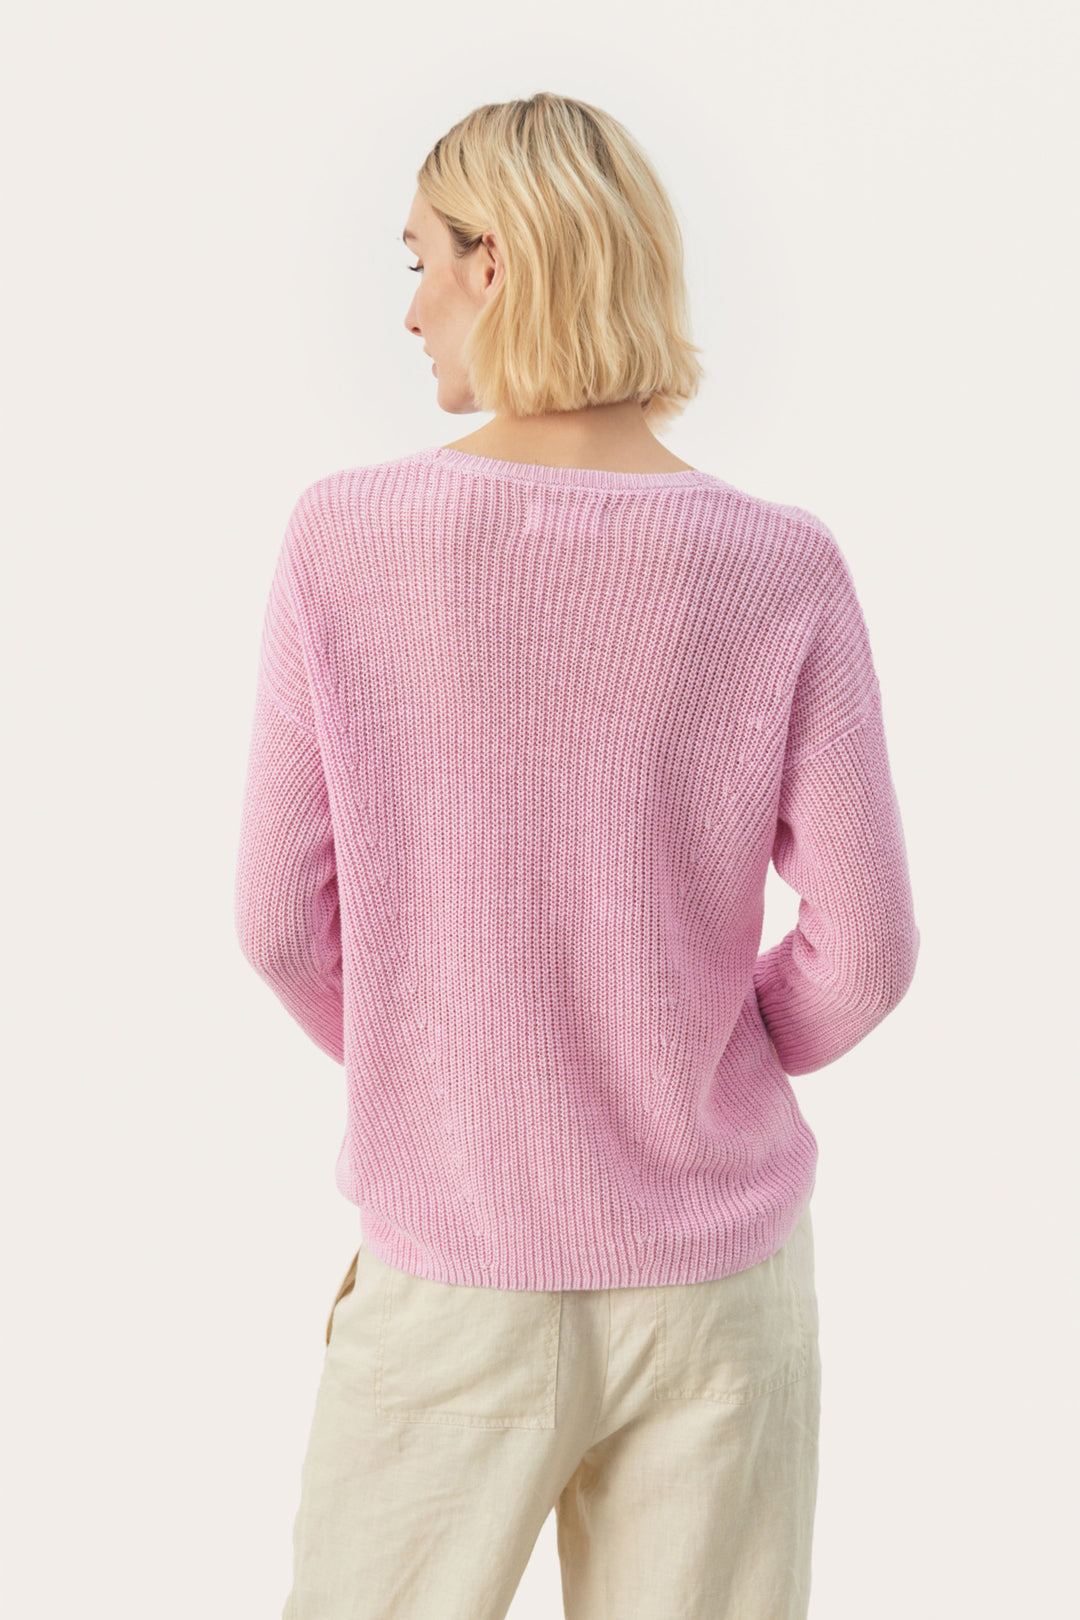 ETRONA LINEN SWEATER (PINK LAVENDER) - PART TWO